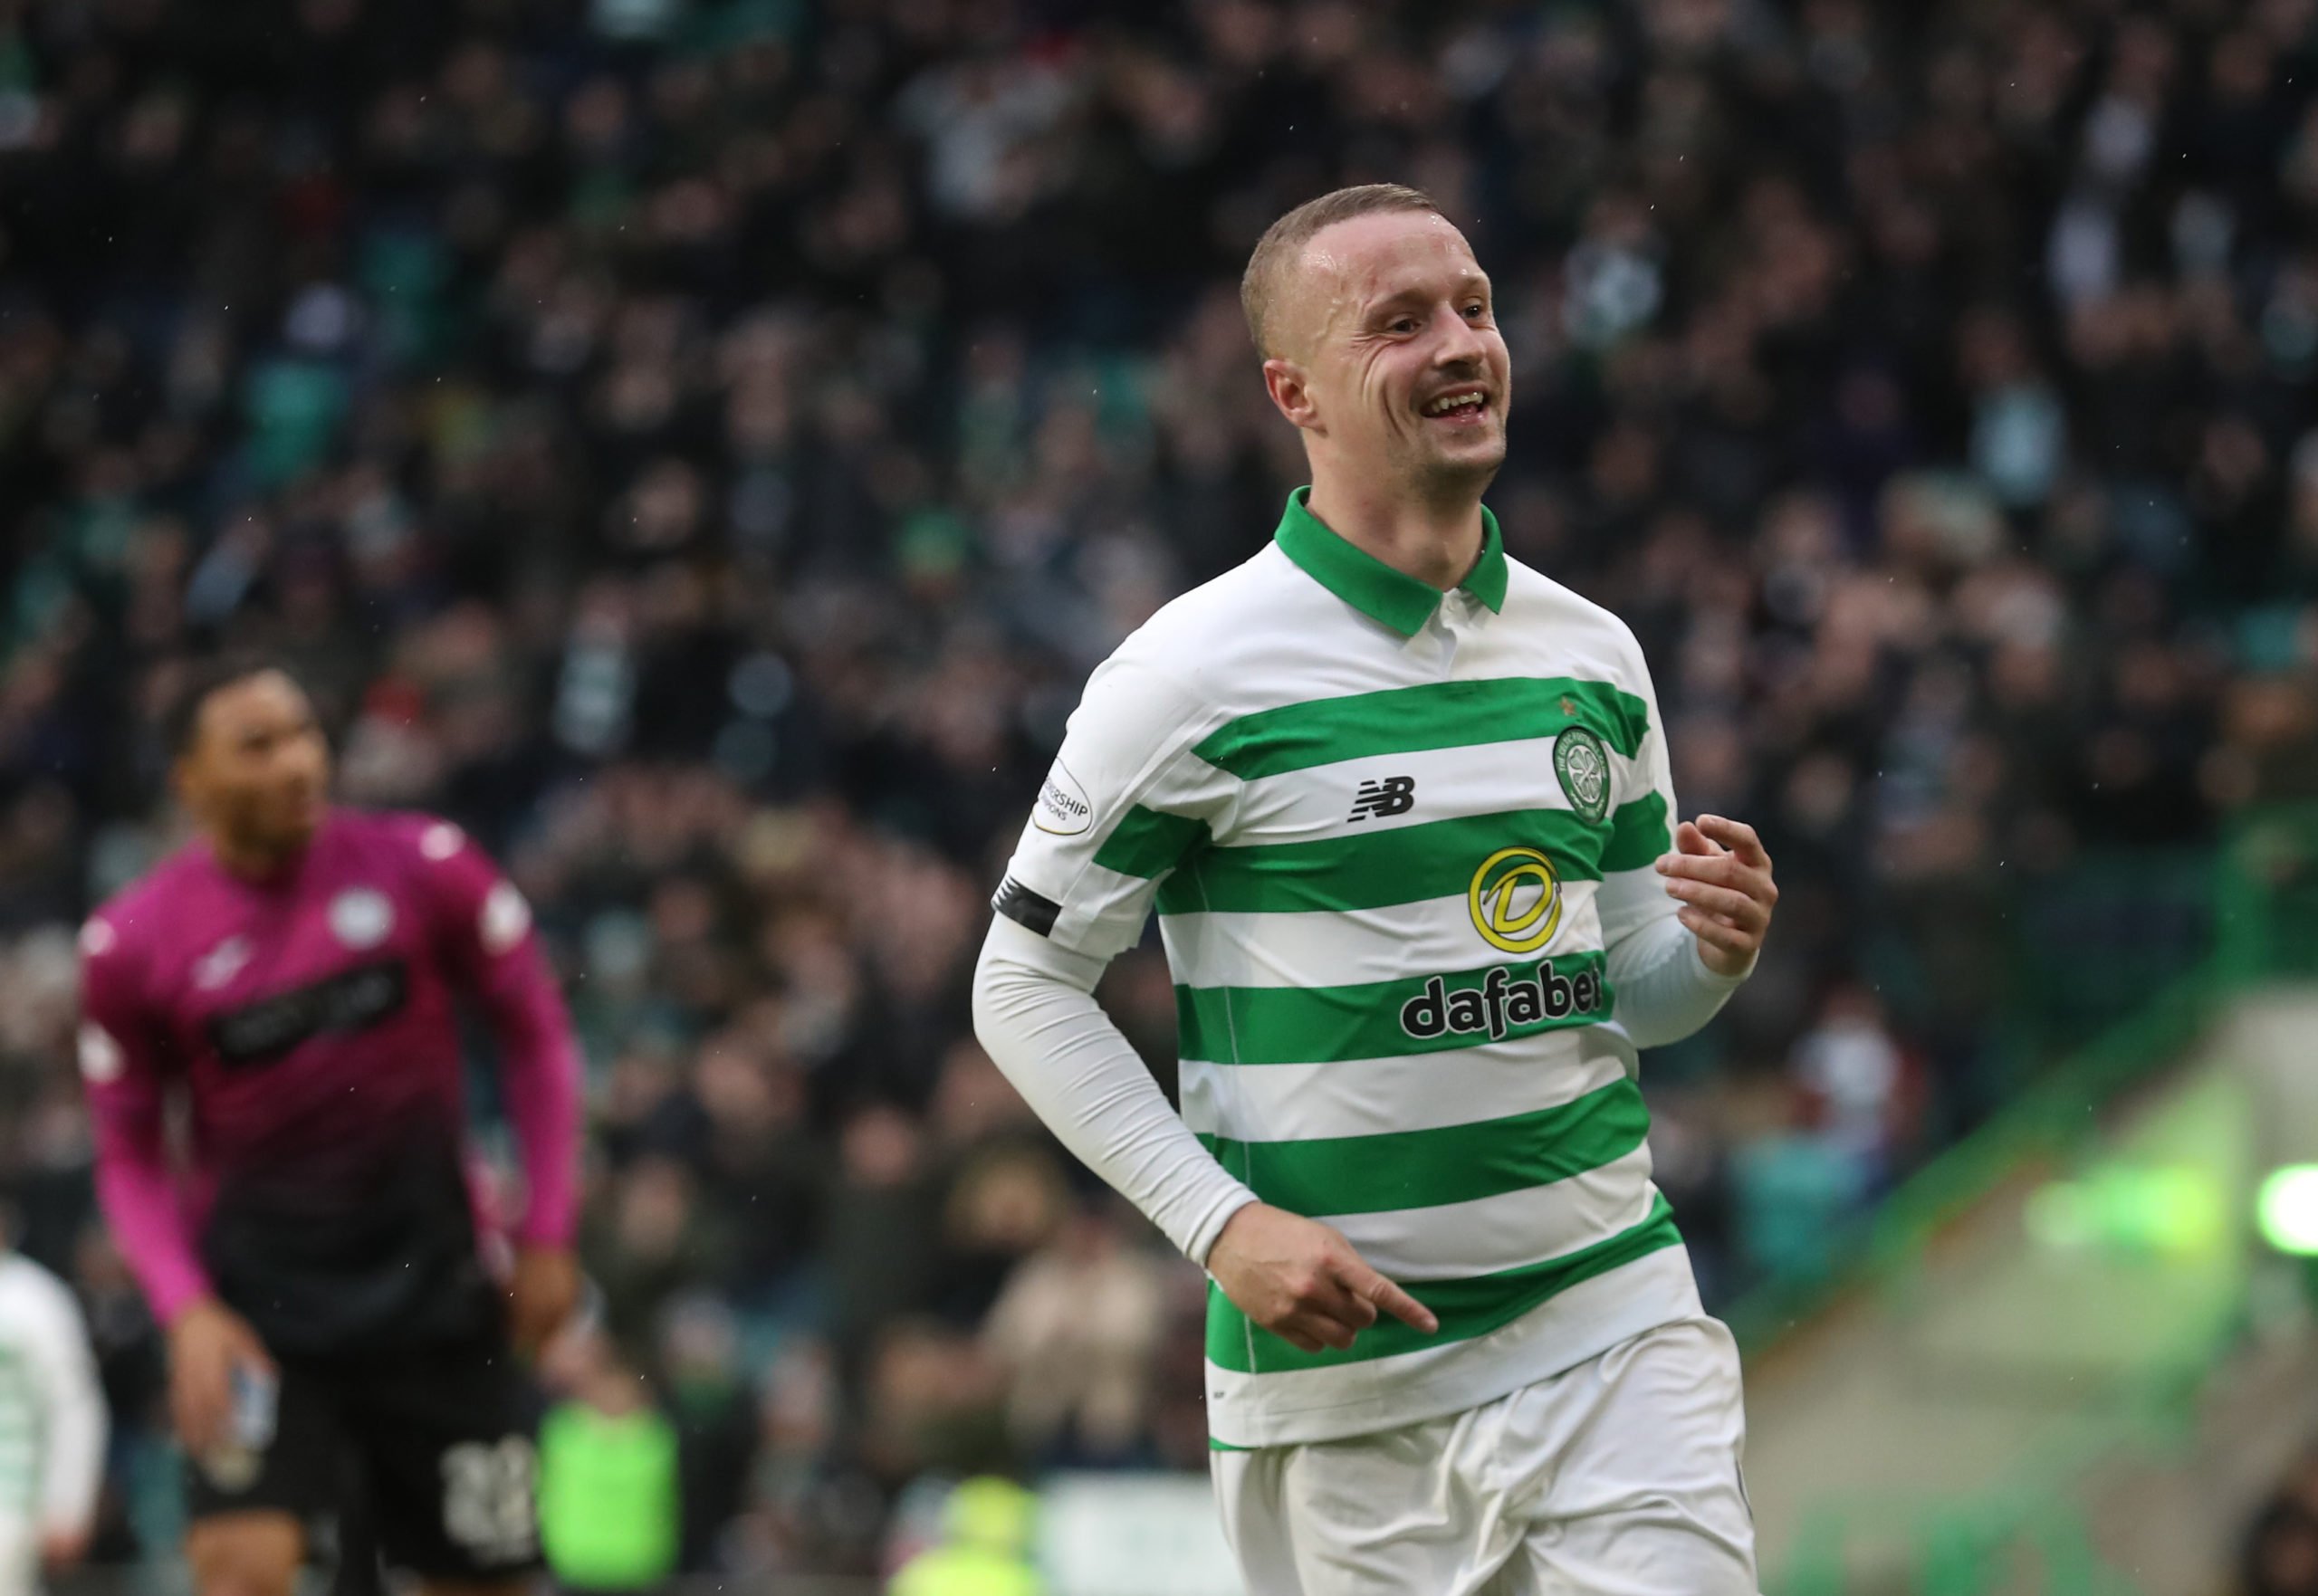 Celtic forward Leigh Griffiths after scoring